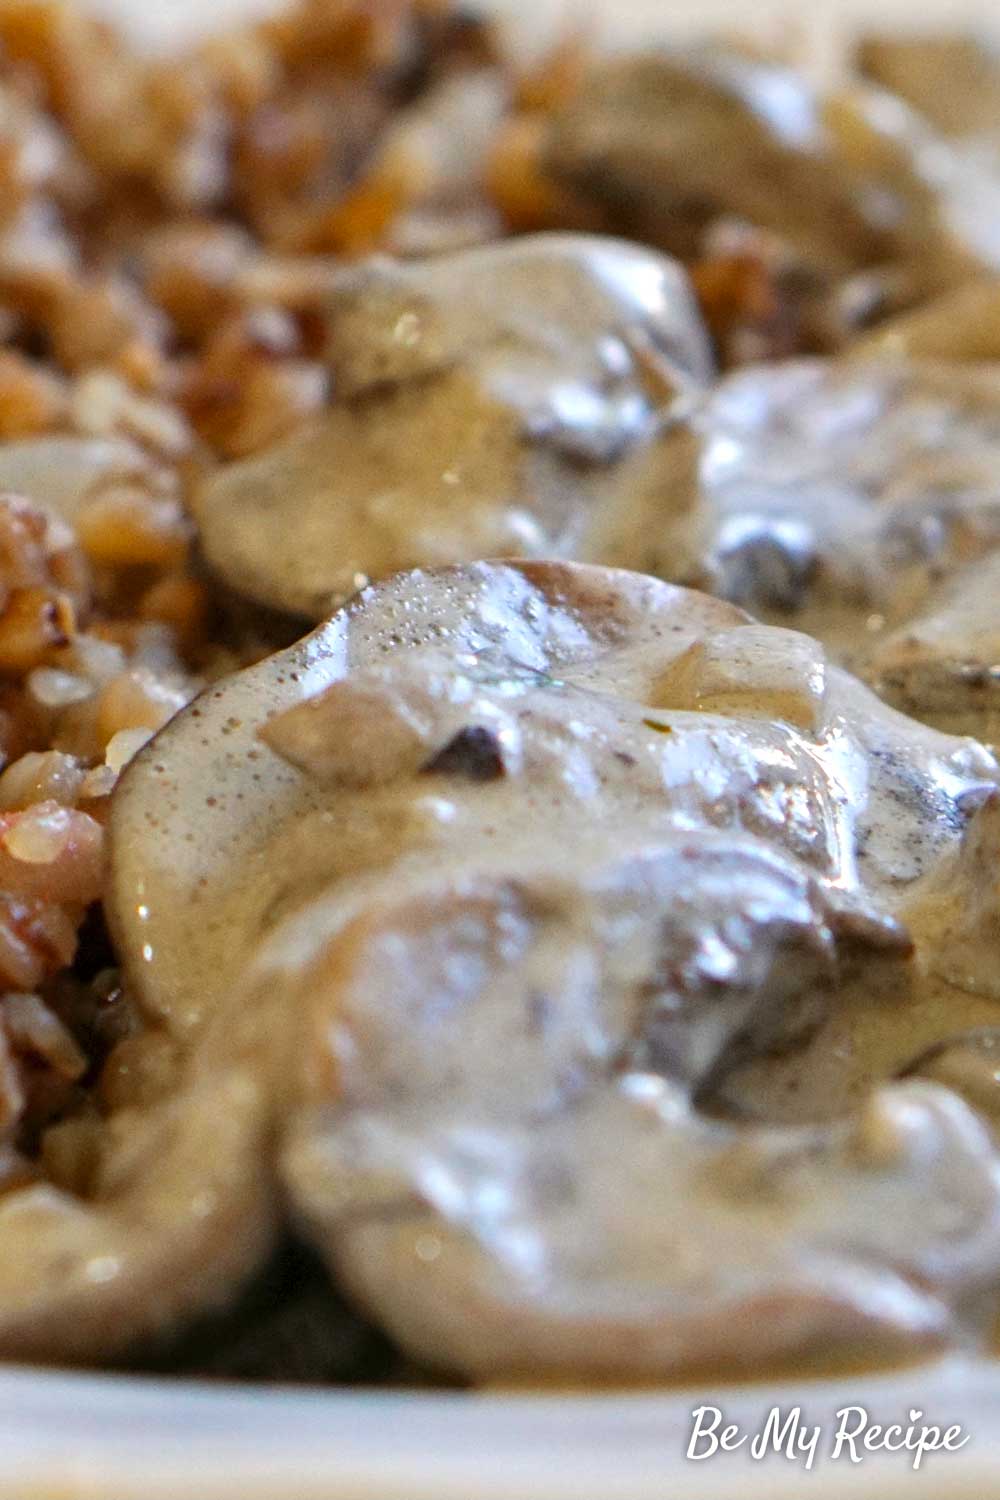 Easy Creamy Mushroom Sauce Recipe that Goes with Just About Anything